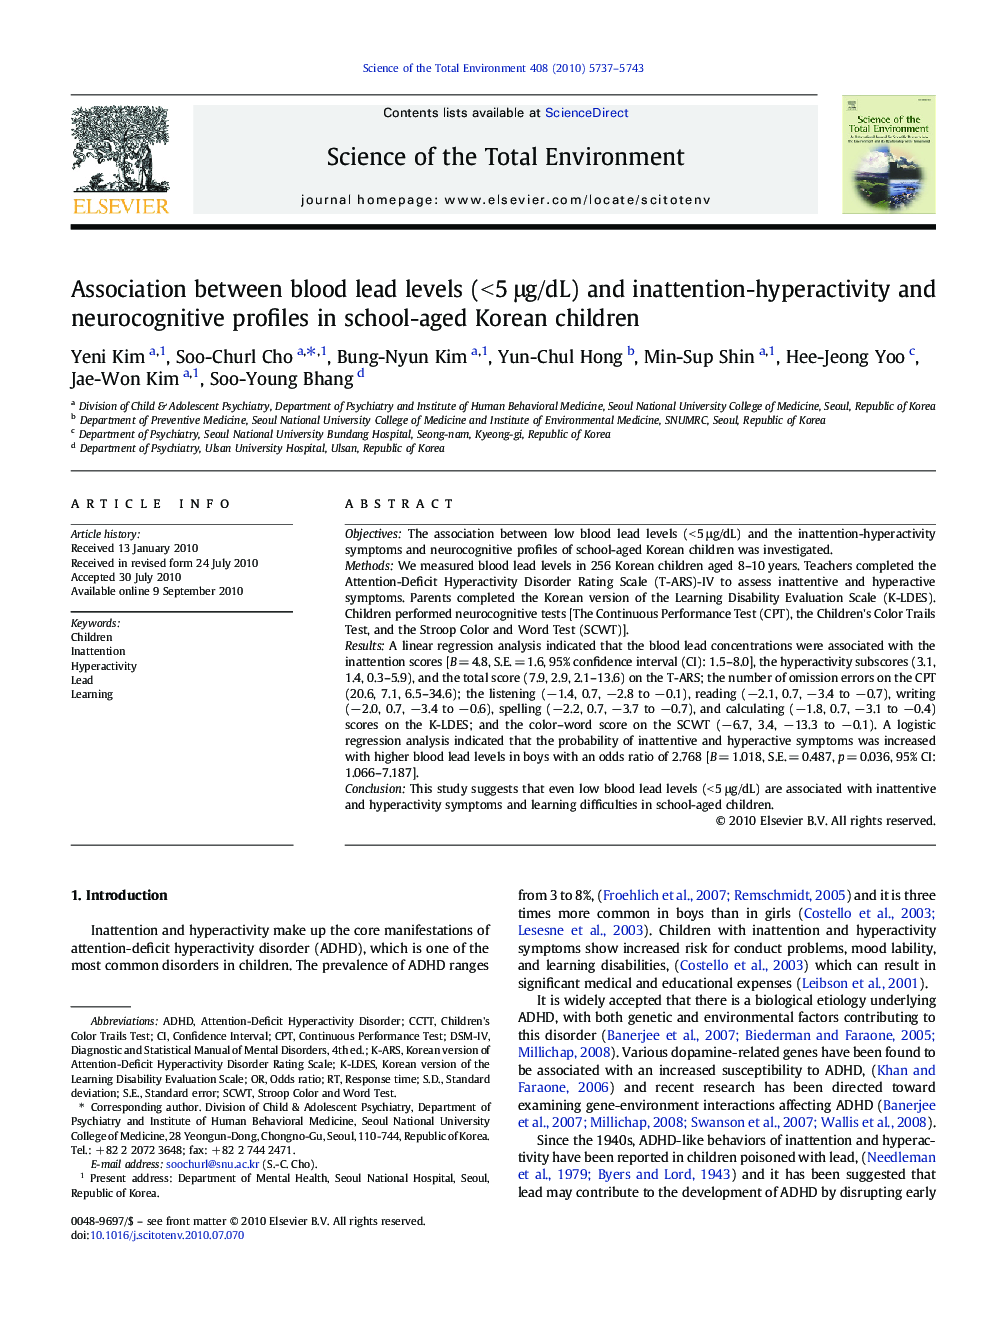 Association between blood lead levels (< 5 μg/dL) and inattention-hyperactivity and neurocognitive profiles in school-aged Korean children